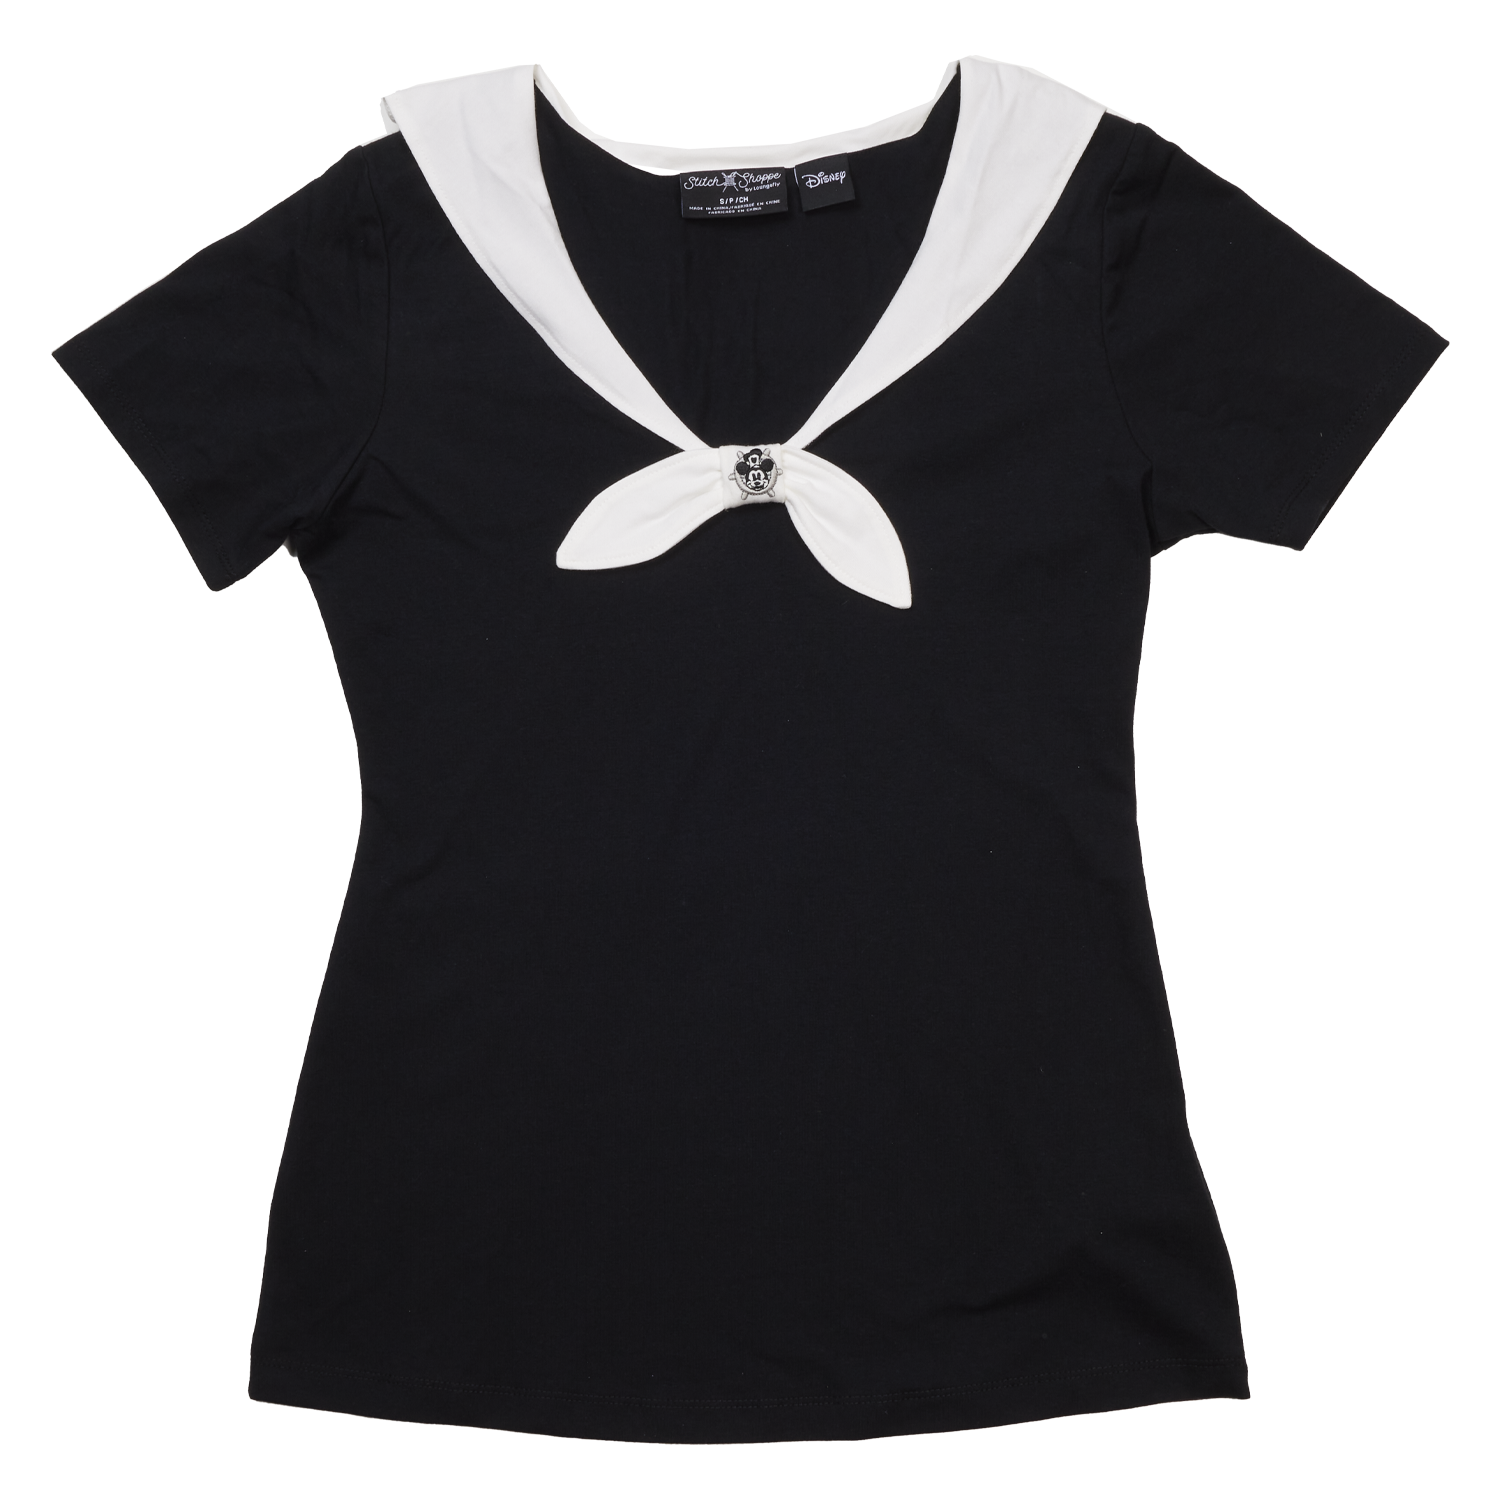 Buy Stitch Shoppe Steamboat Willie Christina Top at Loungefly.